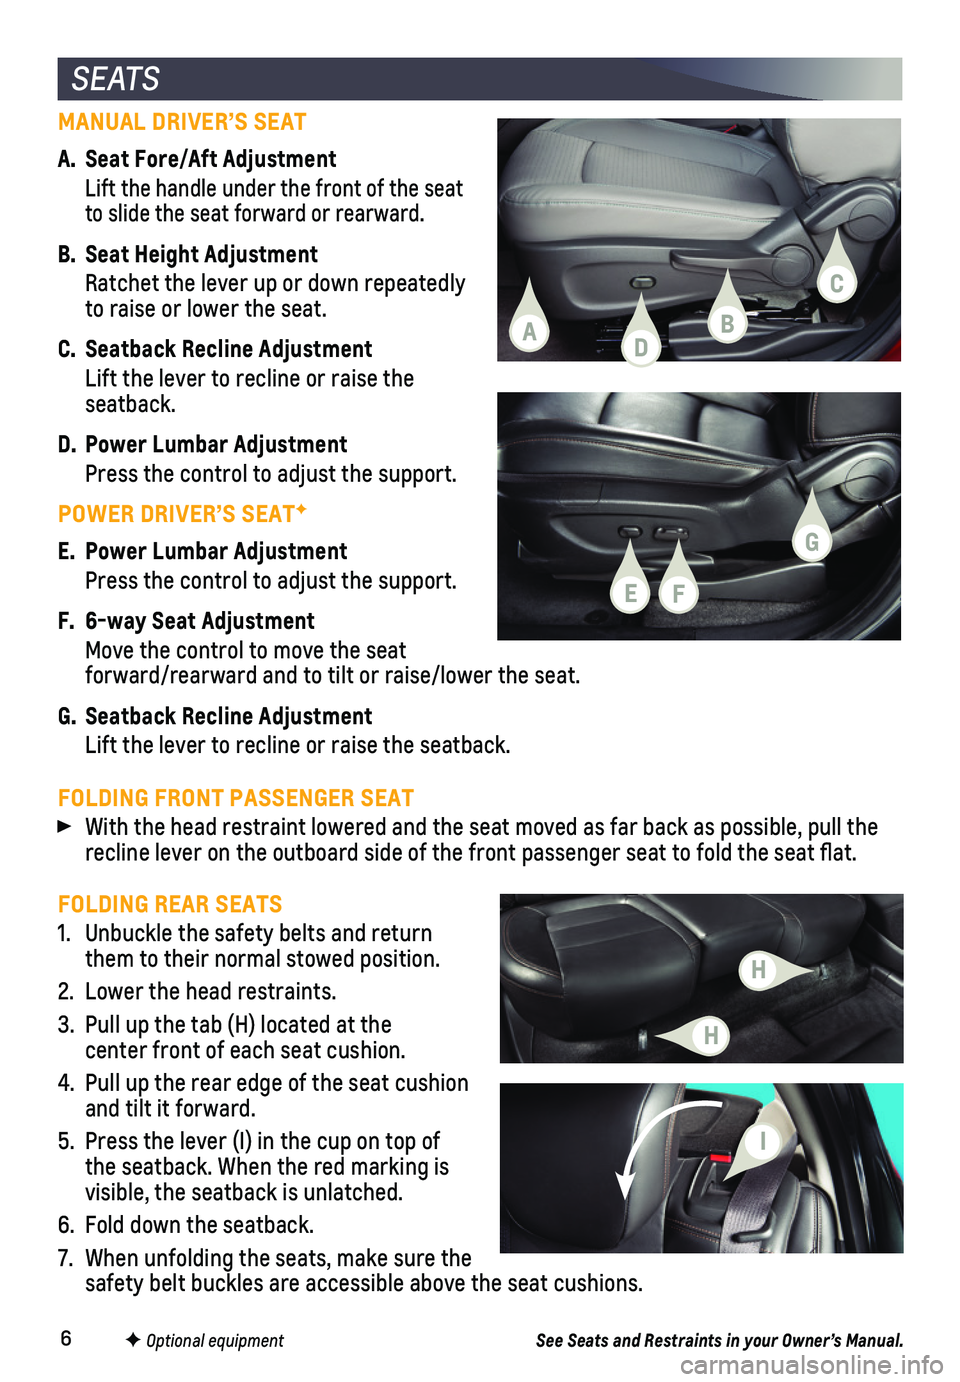 CHEVROLET TRAX 2018  Get To Know Guide 6
FOLDING REAR SEATS
1. Unbuckle the safety belts and return them to their normal stowed position.
2. Lower the head restraints.
3. Pull up the tab (H) located at the  center front of each seat cushio